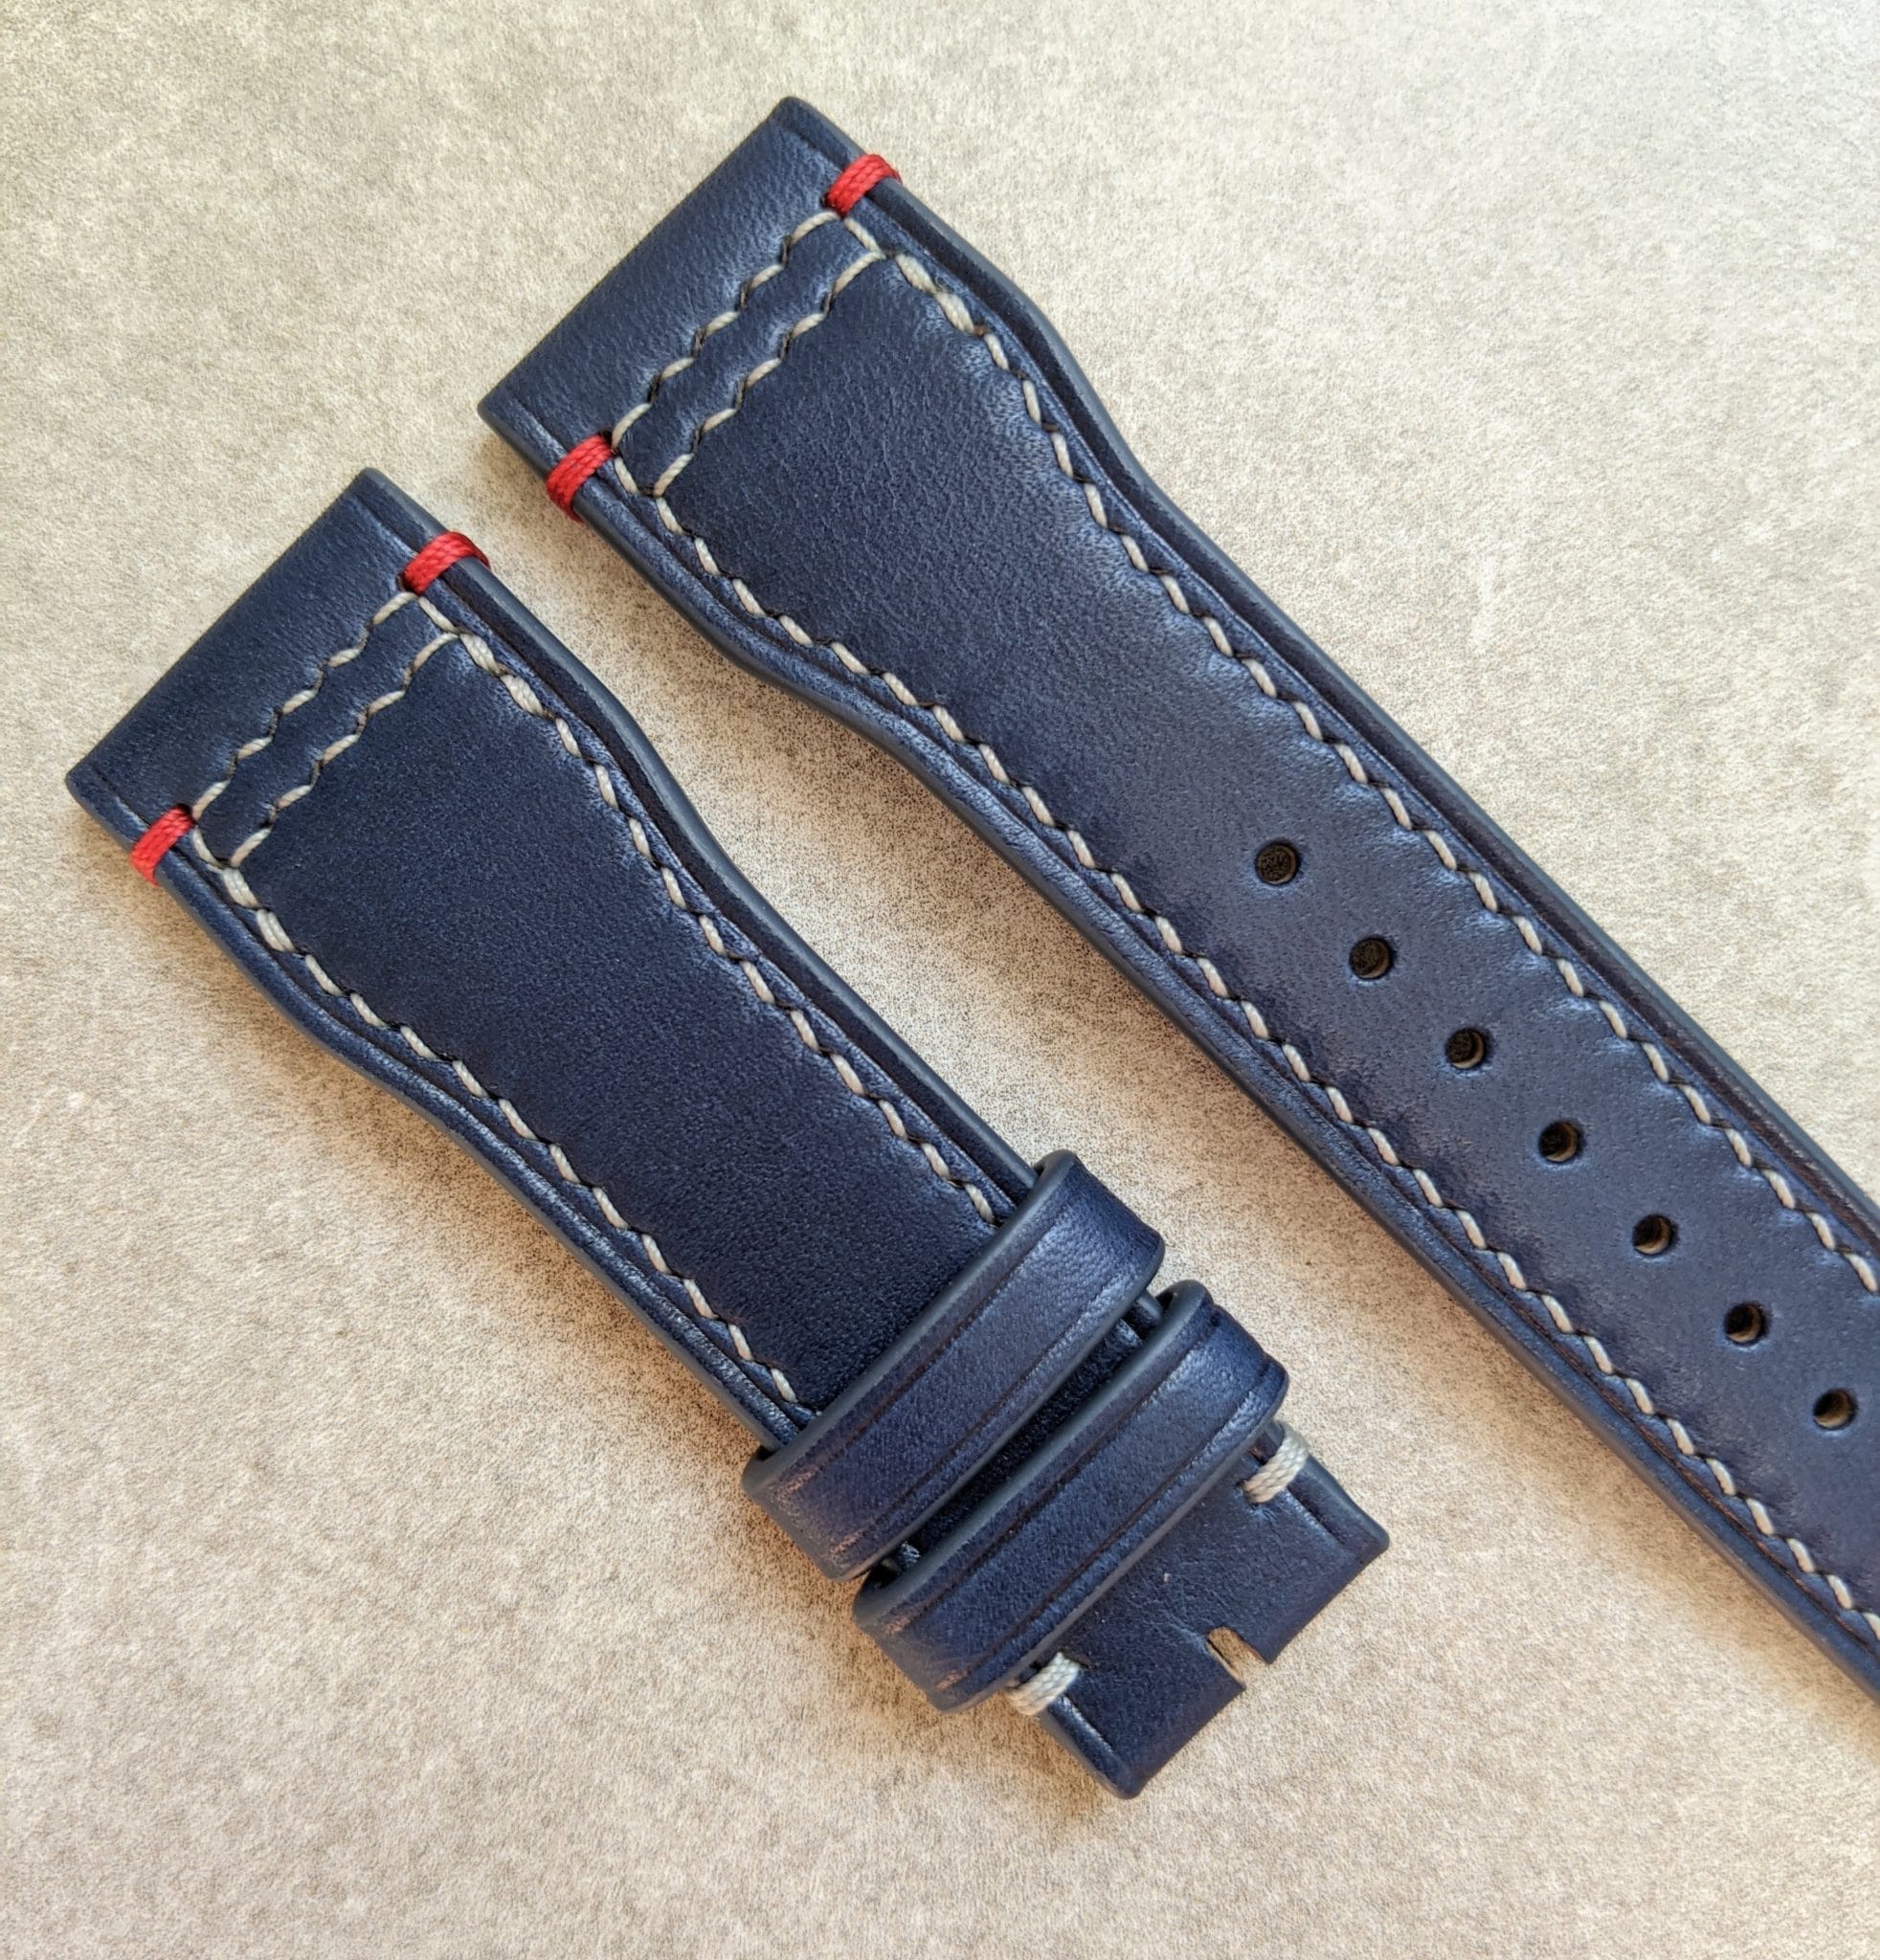 French Calfskin IWC Style Strap - Navy Blue with contrast stitching - The Strap Tailor